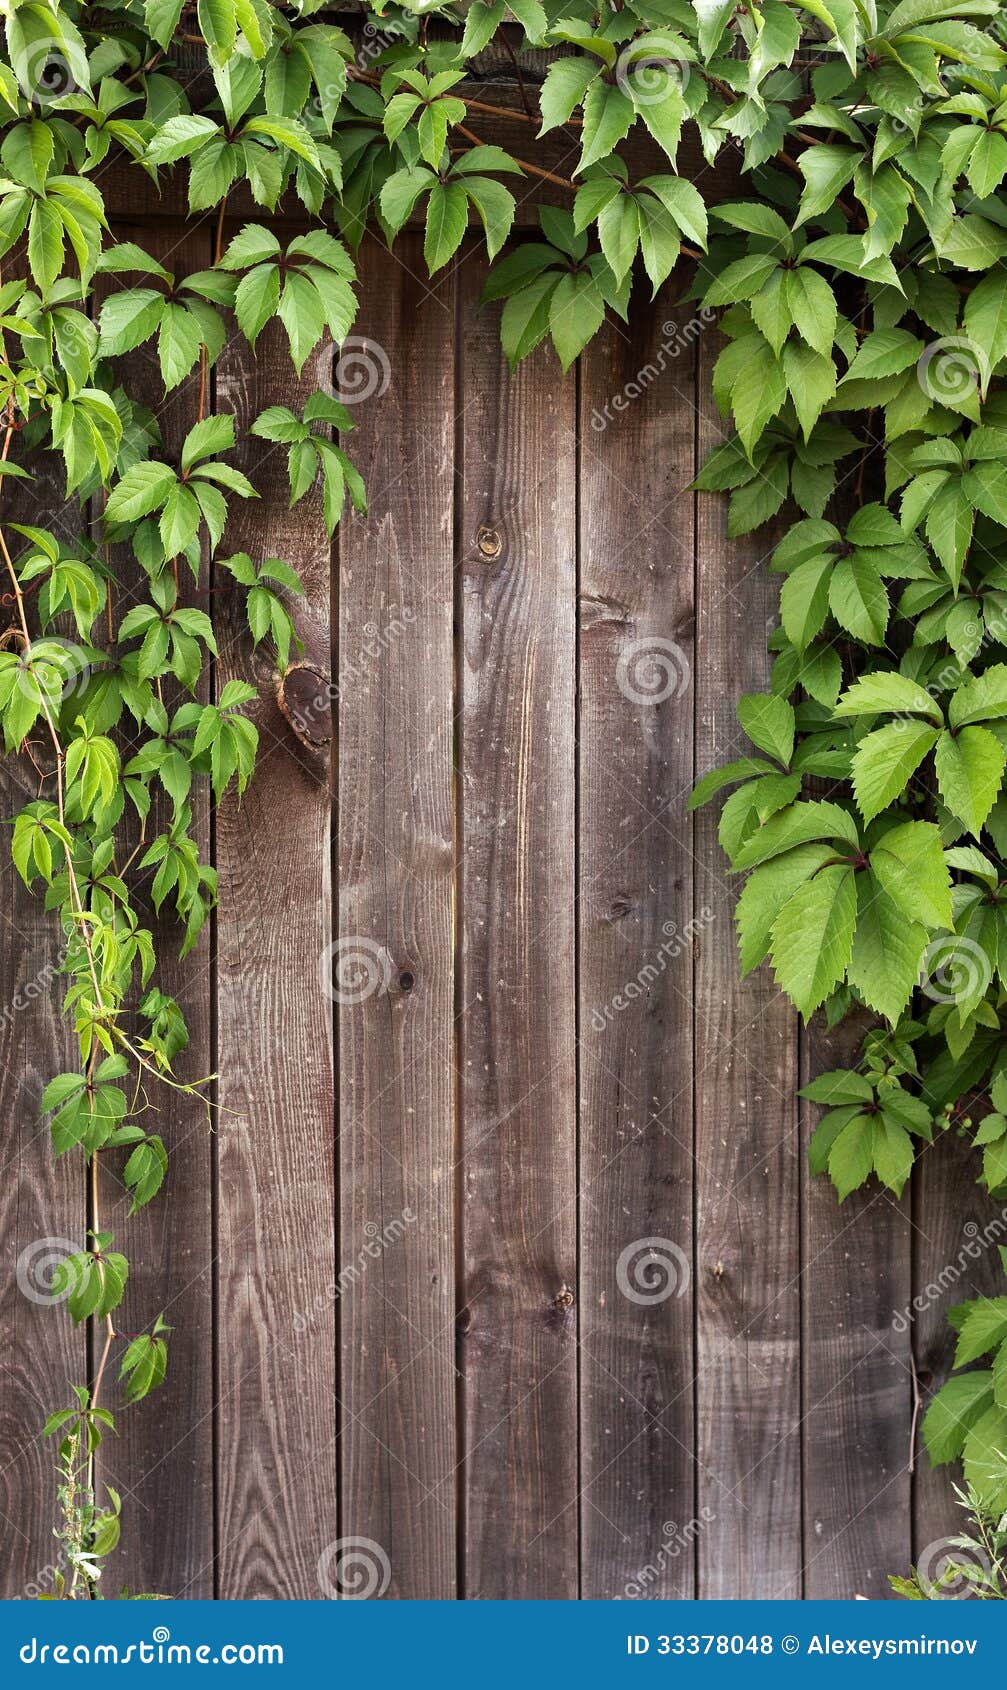 Ivy Frame On Wooden Fance Royalty Free Stock Photos ...